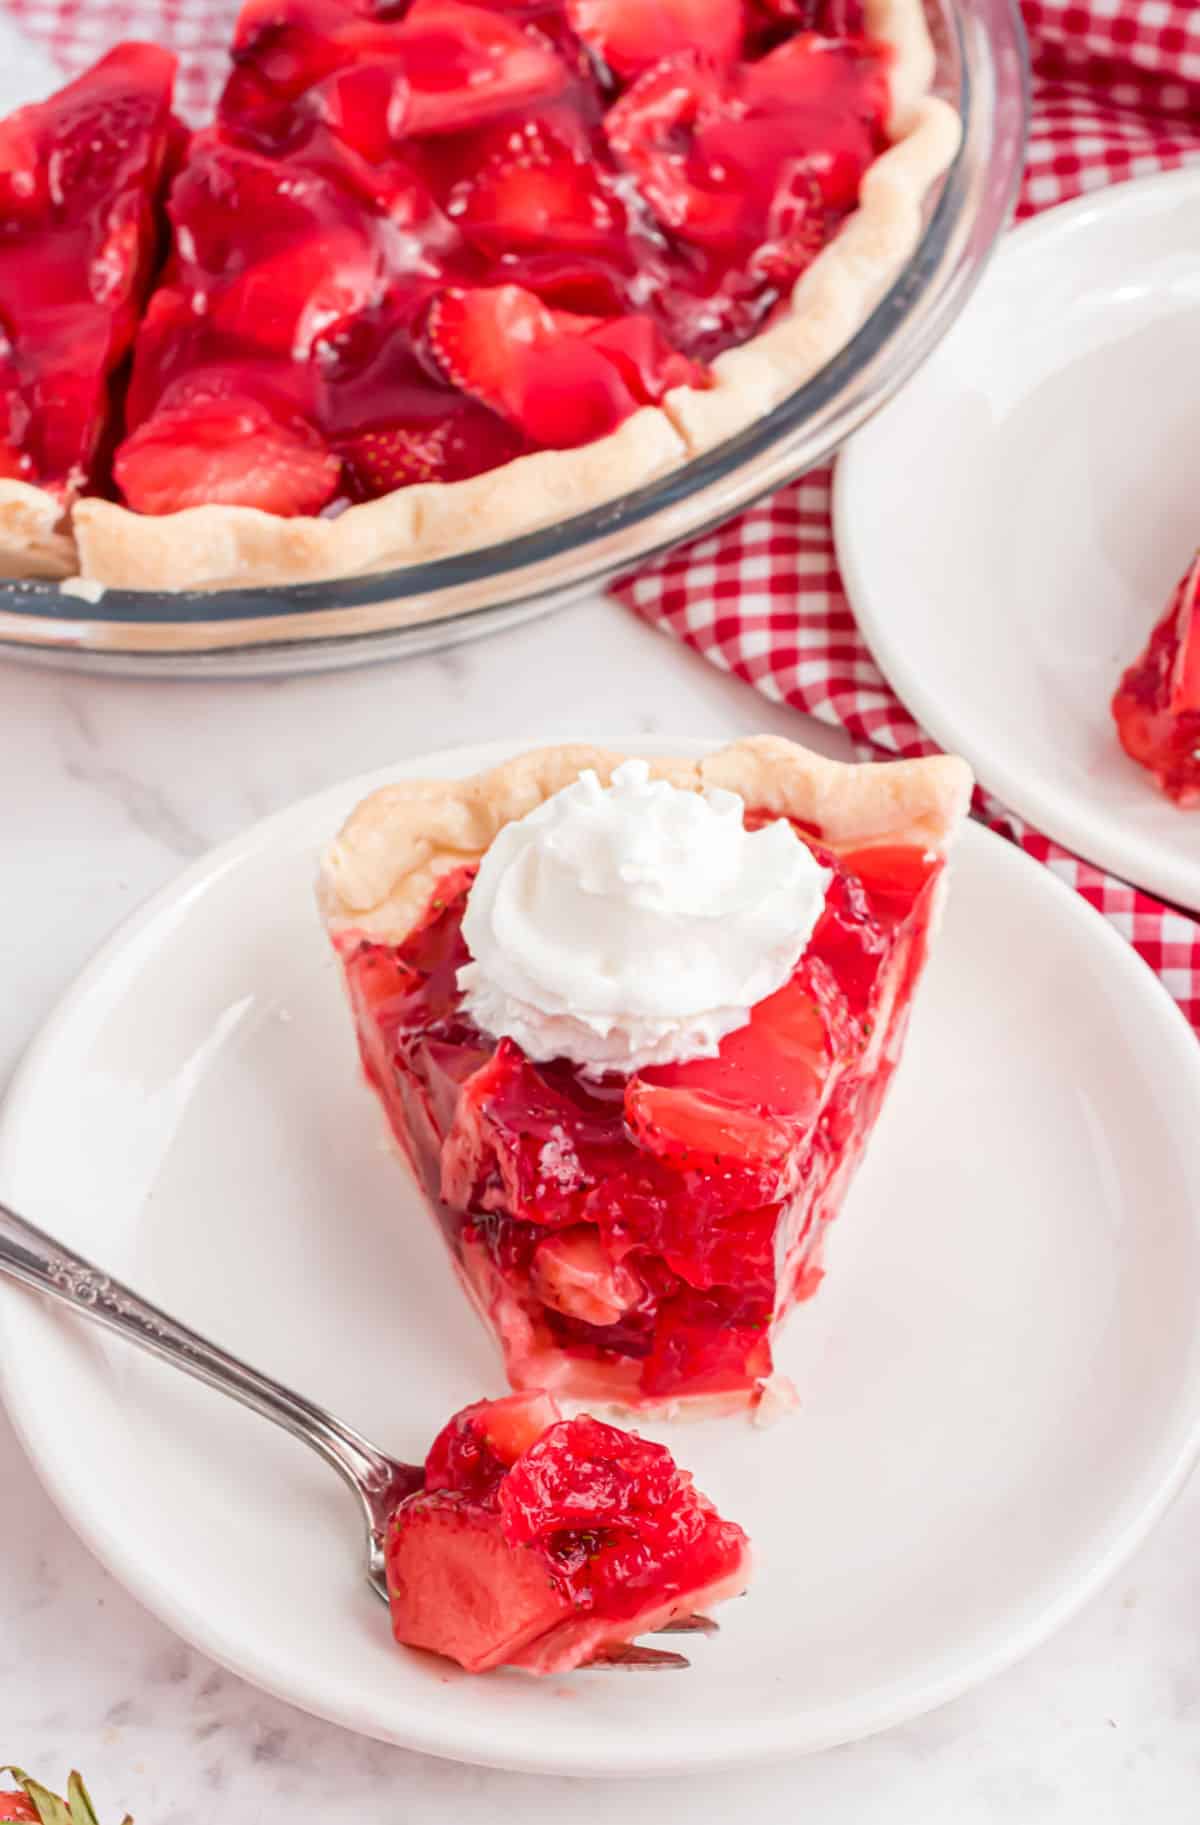 Strawberry pie on a plate with a bite taken out.